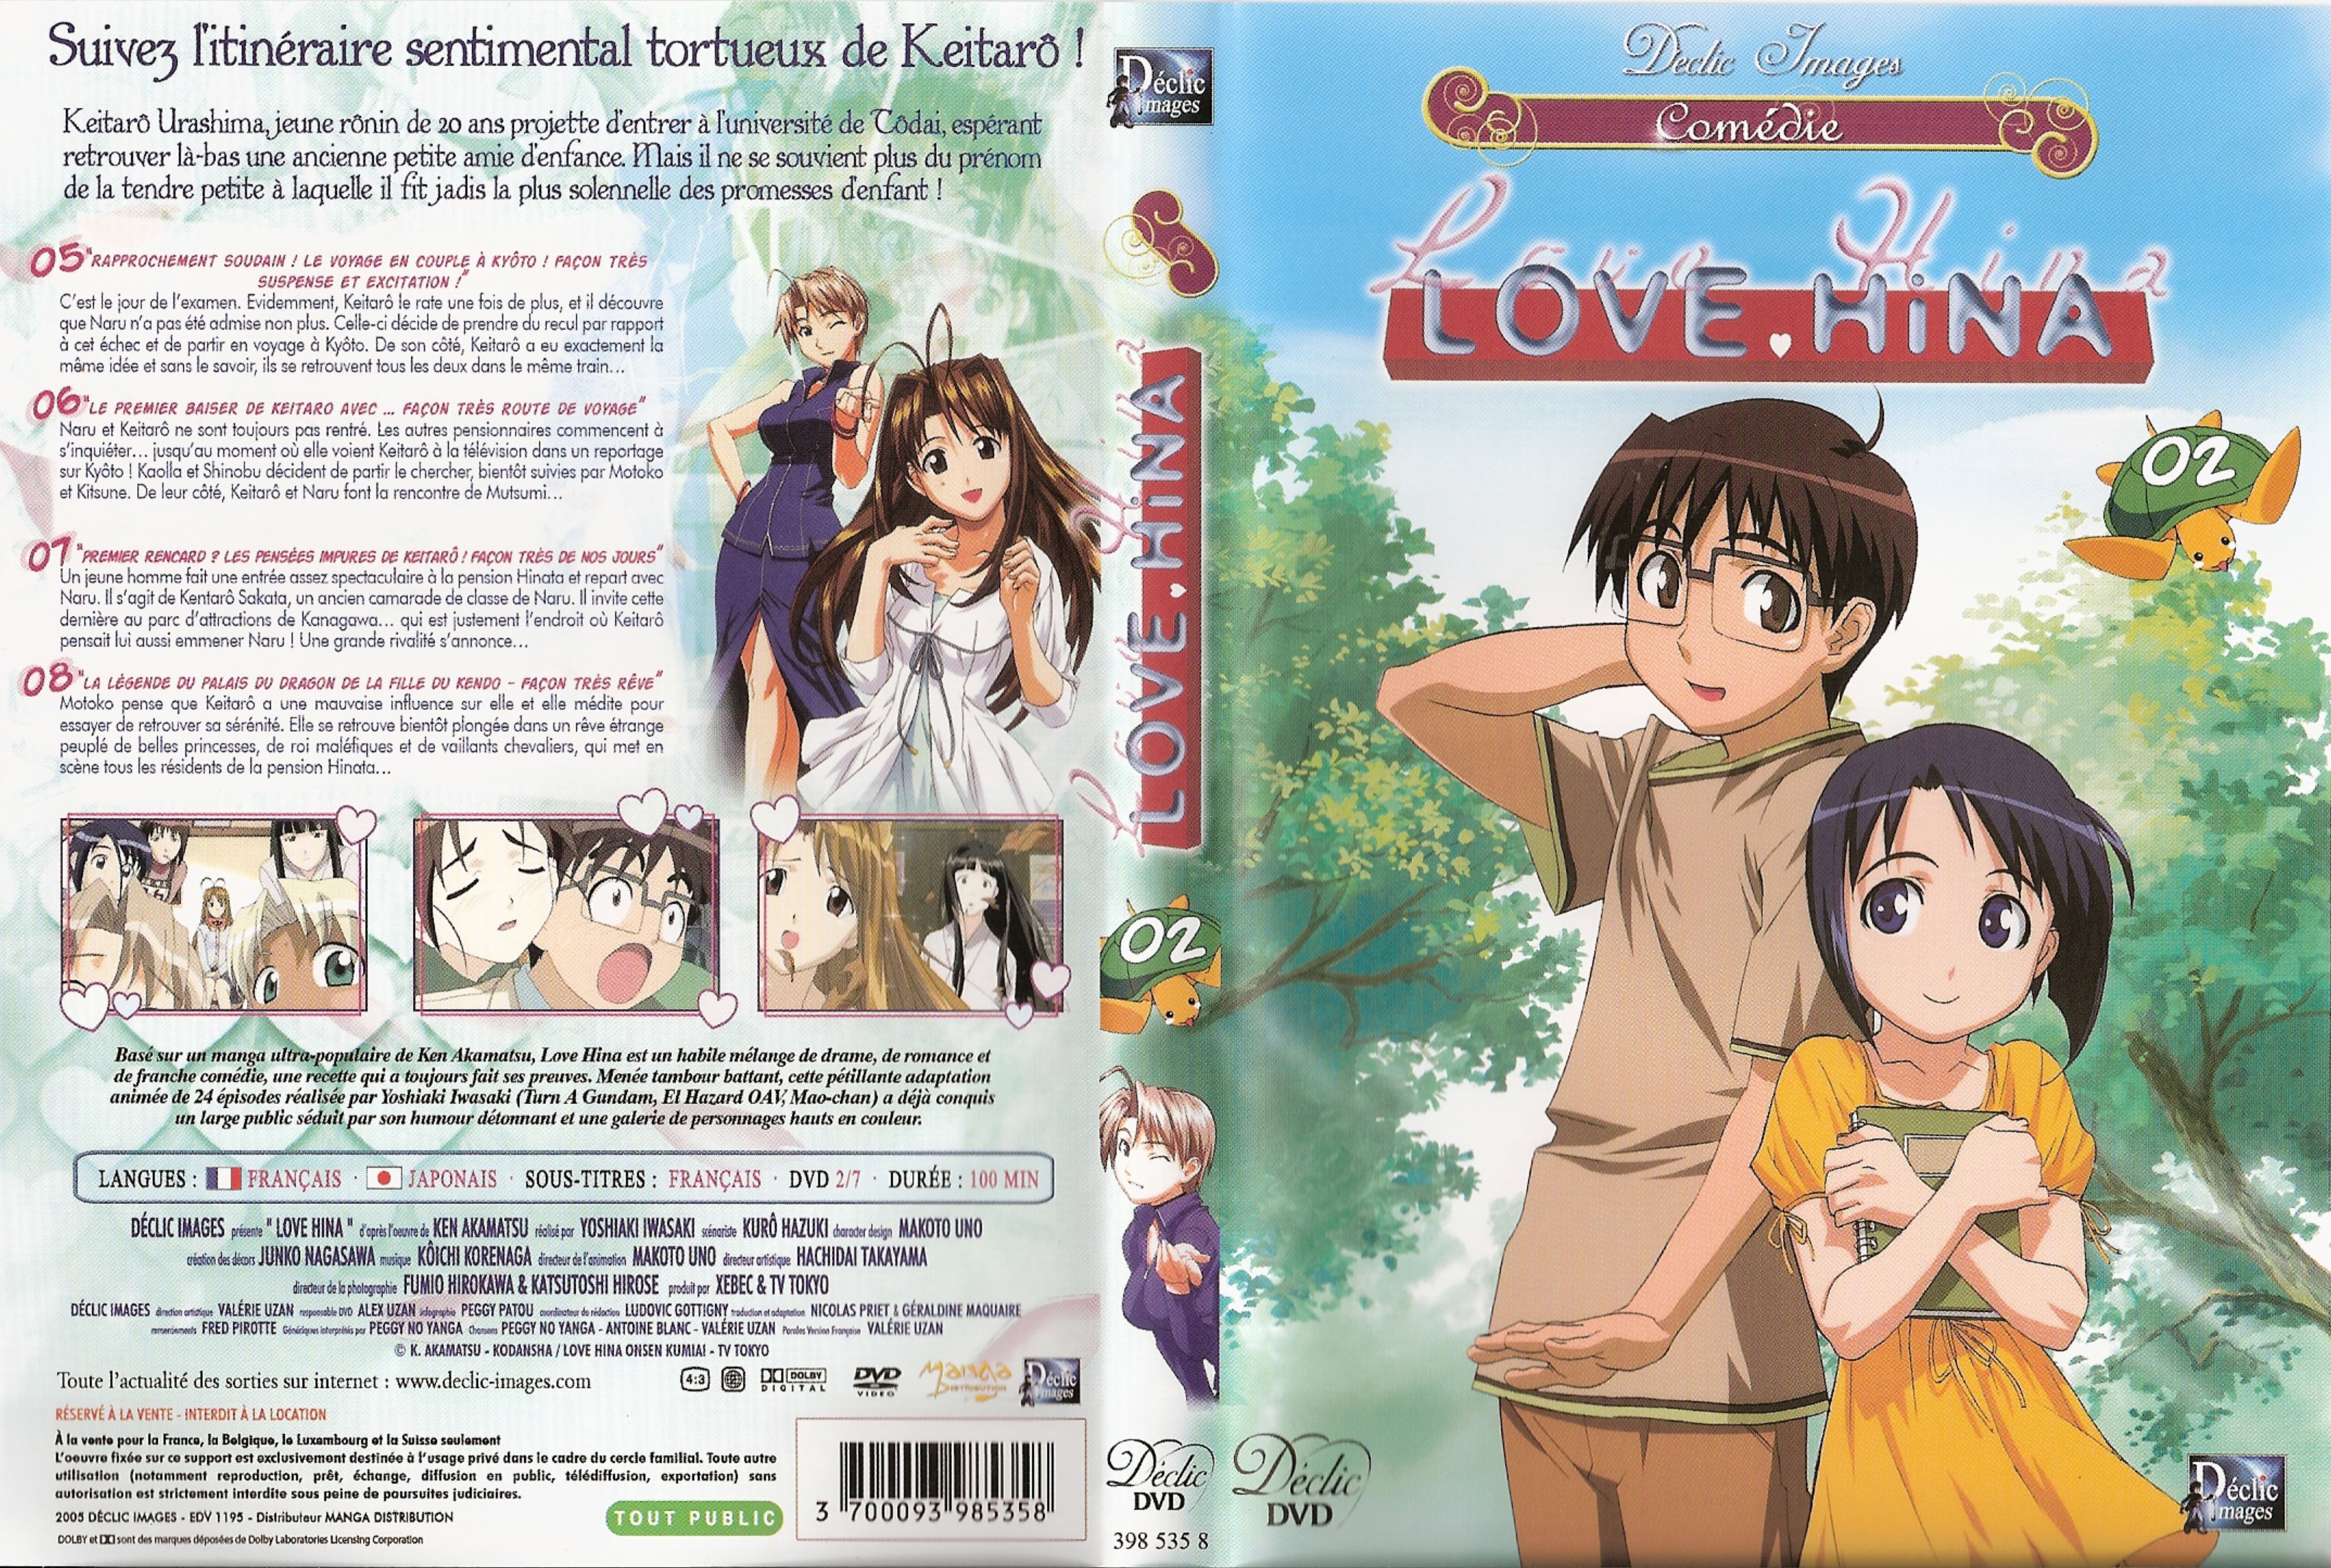 Jaquette DVD Love Hina DVD 02